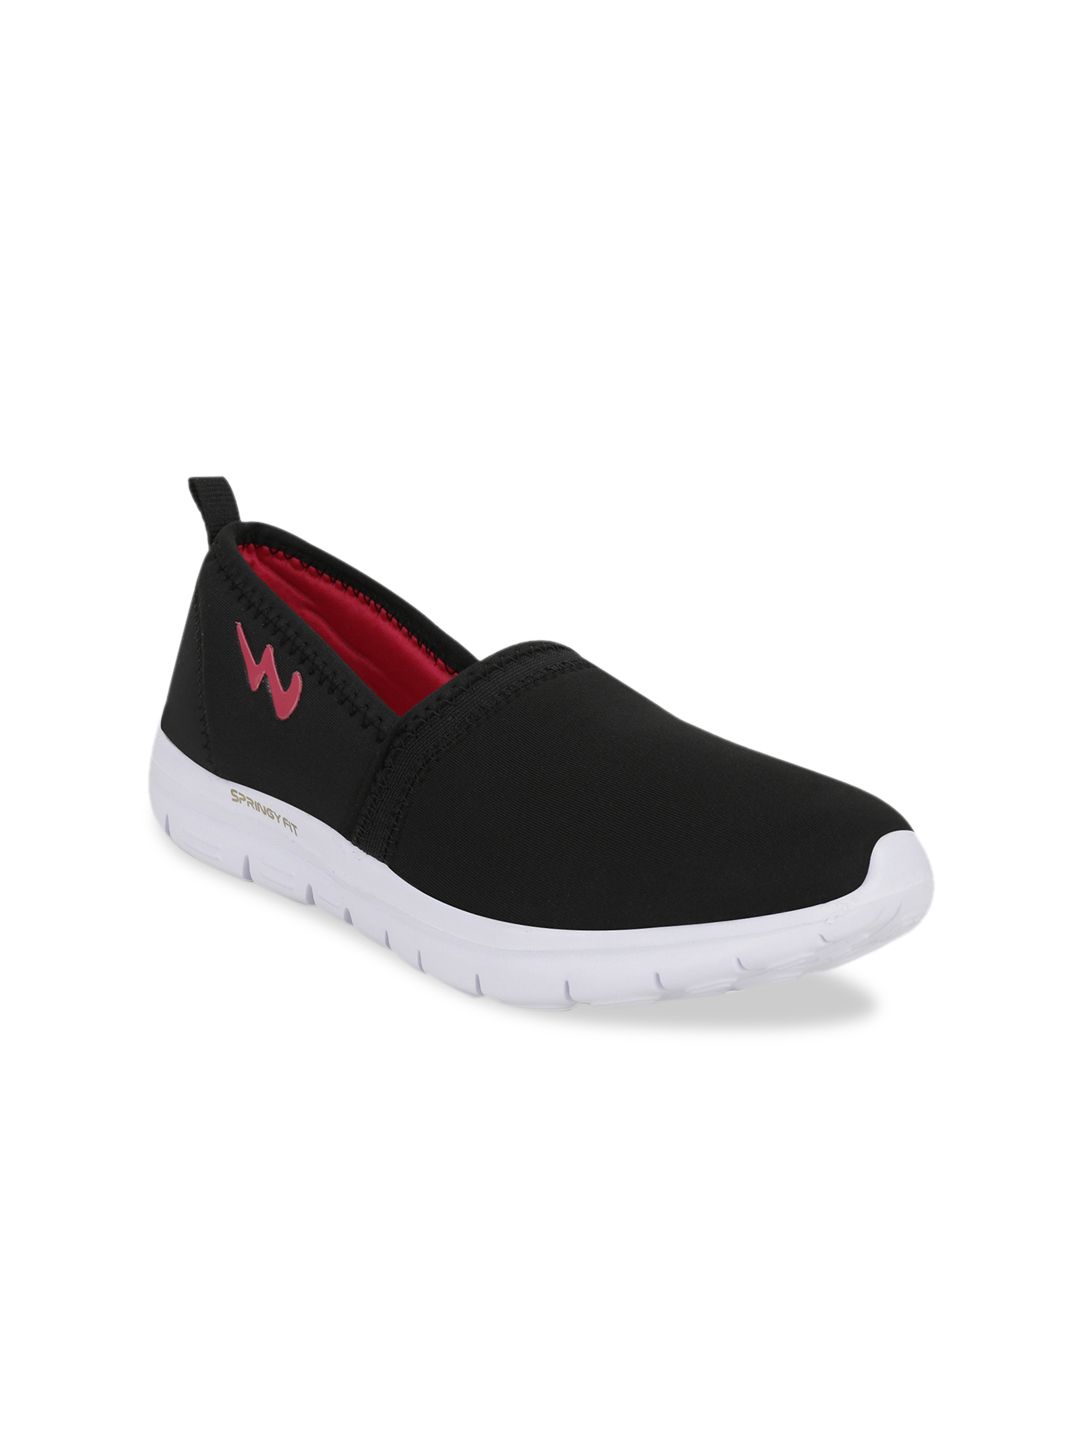 Campus Women Black Running Shoes Price in India